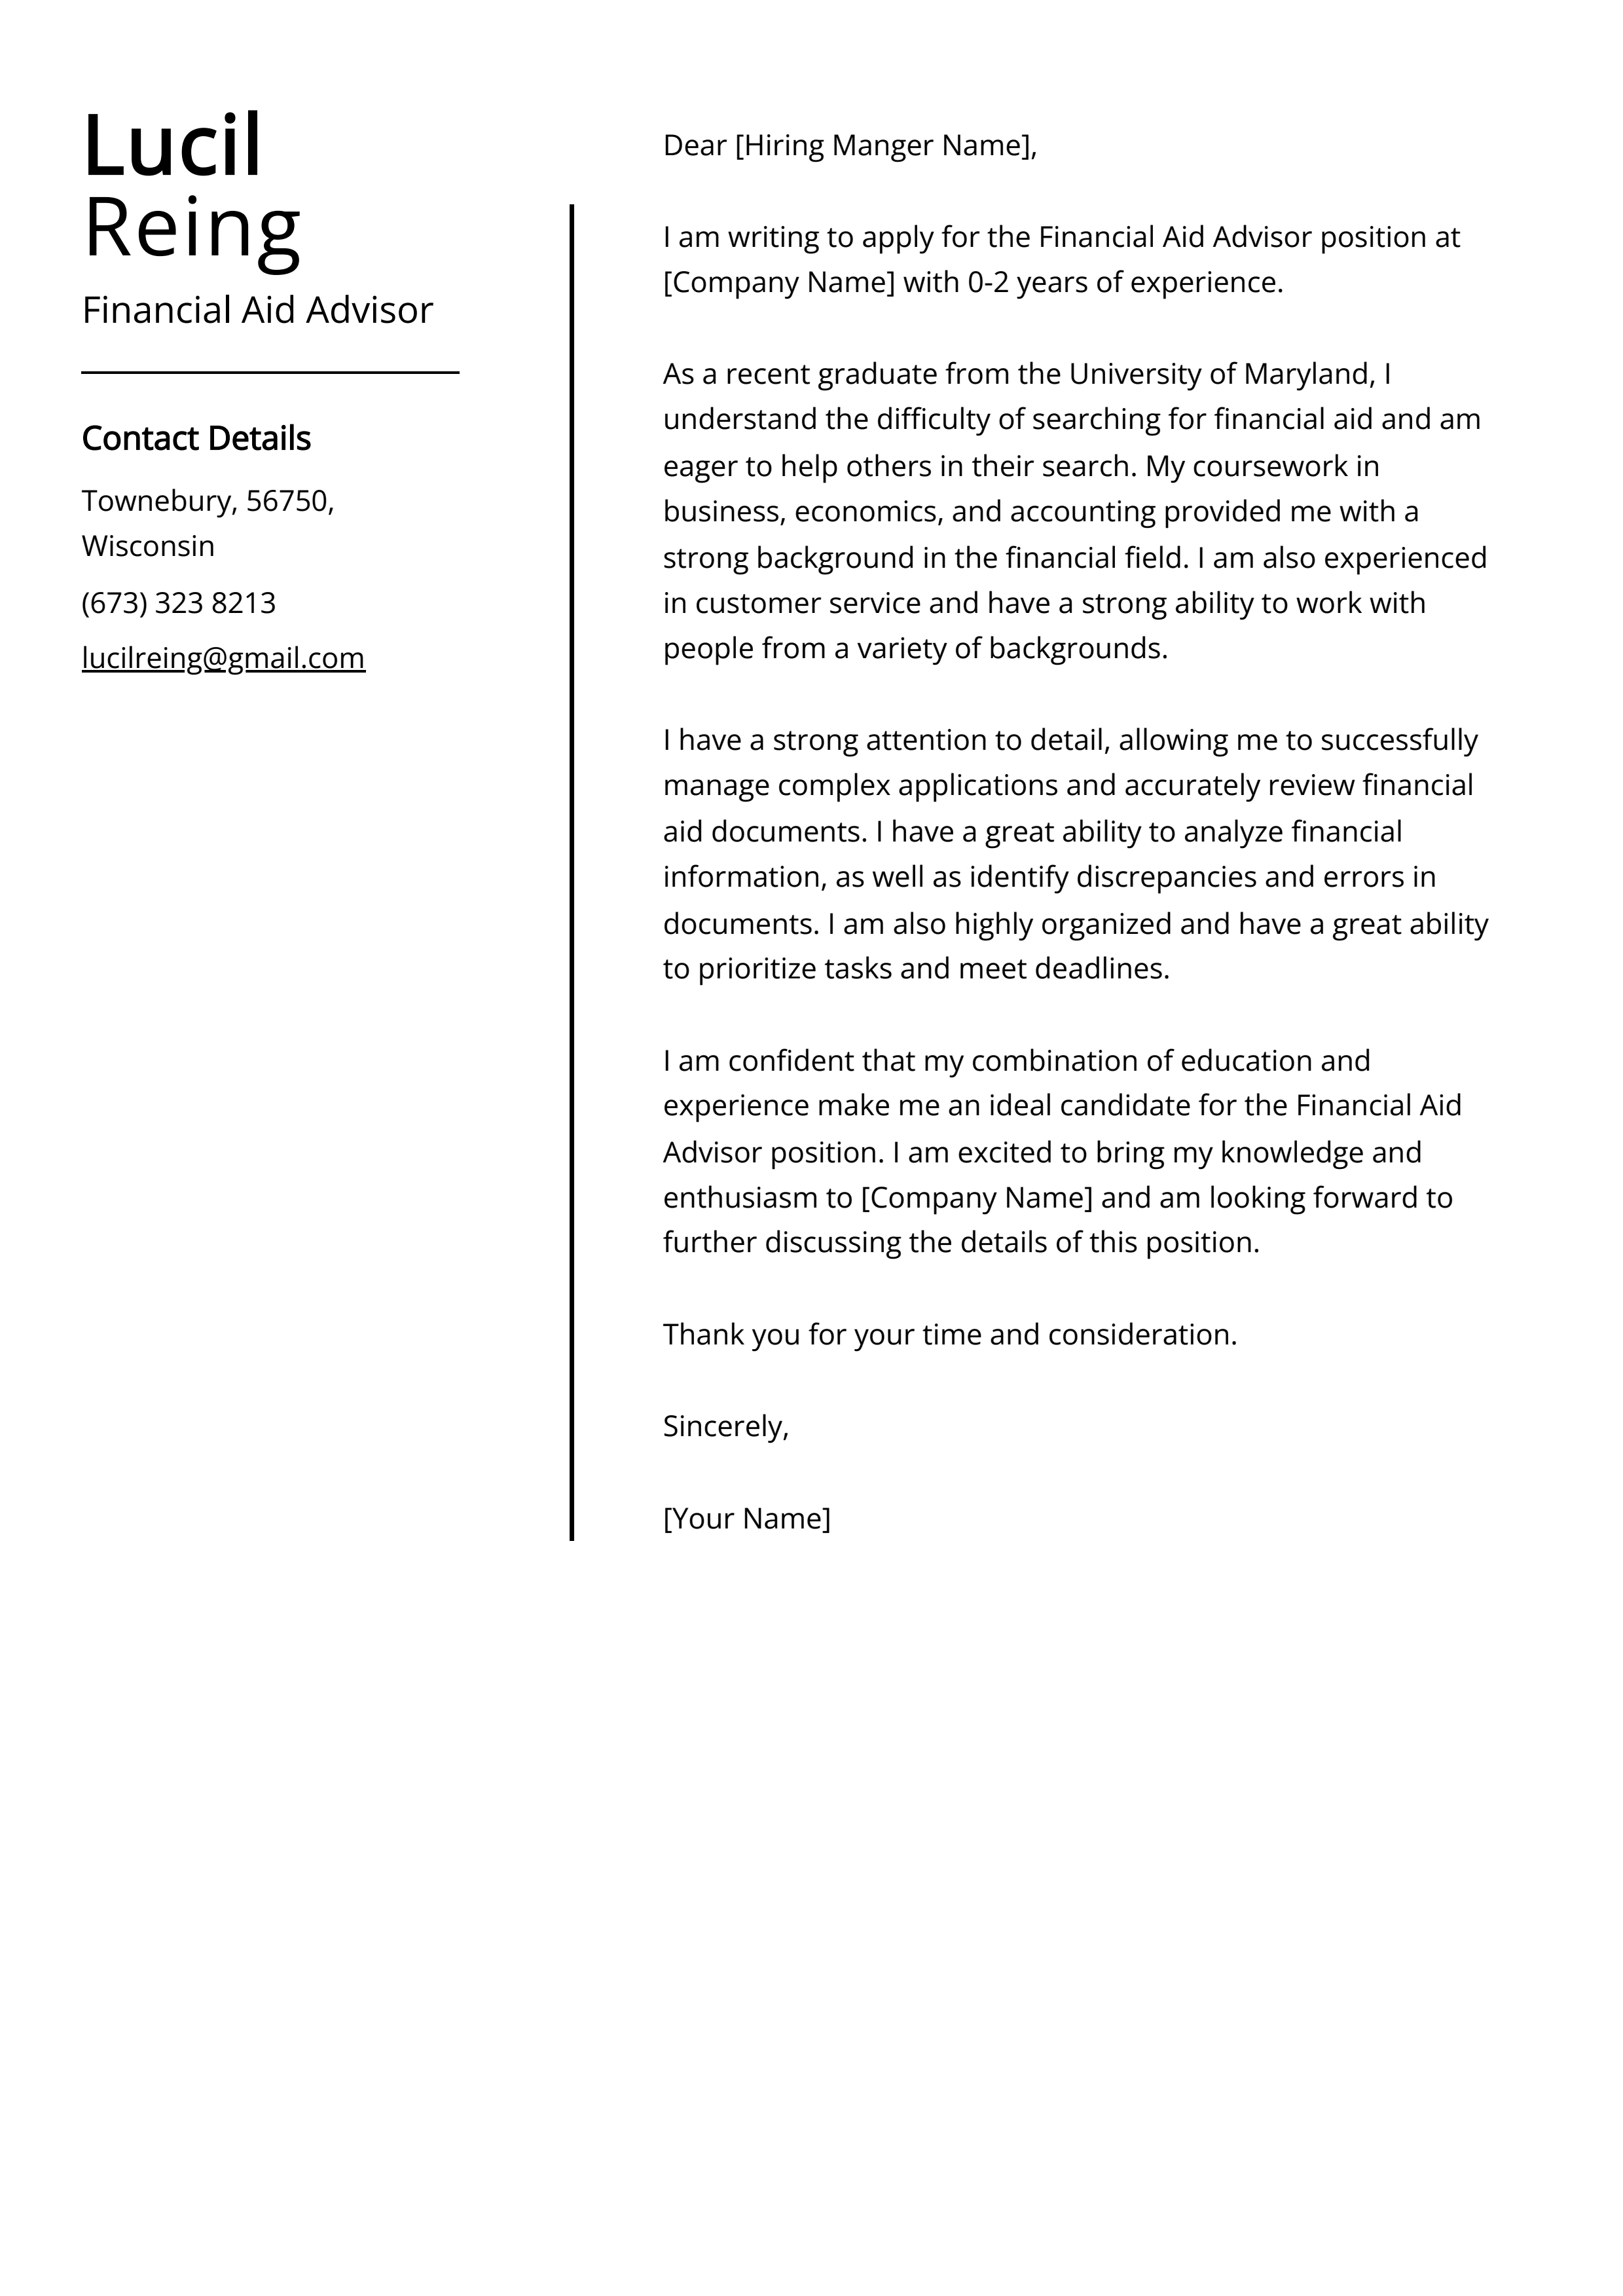 Financial Aid Advisor Cover Letter Example